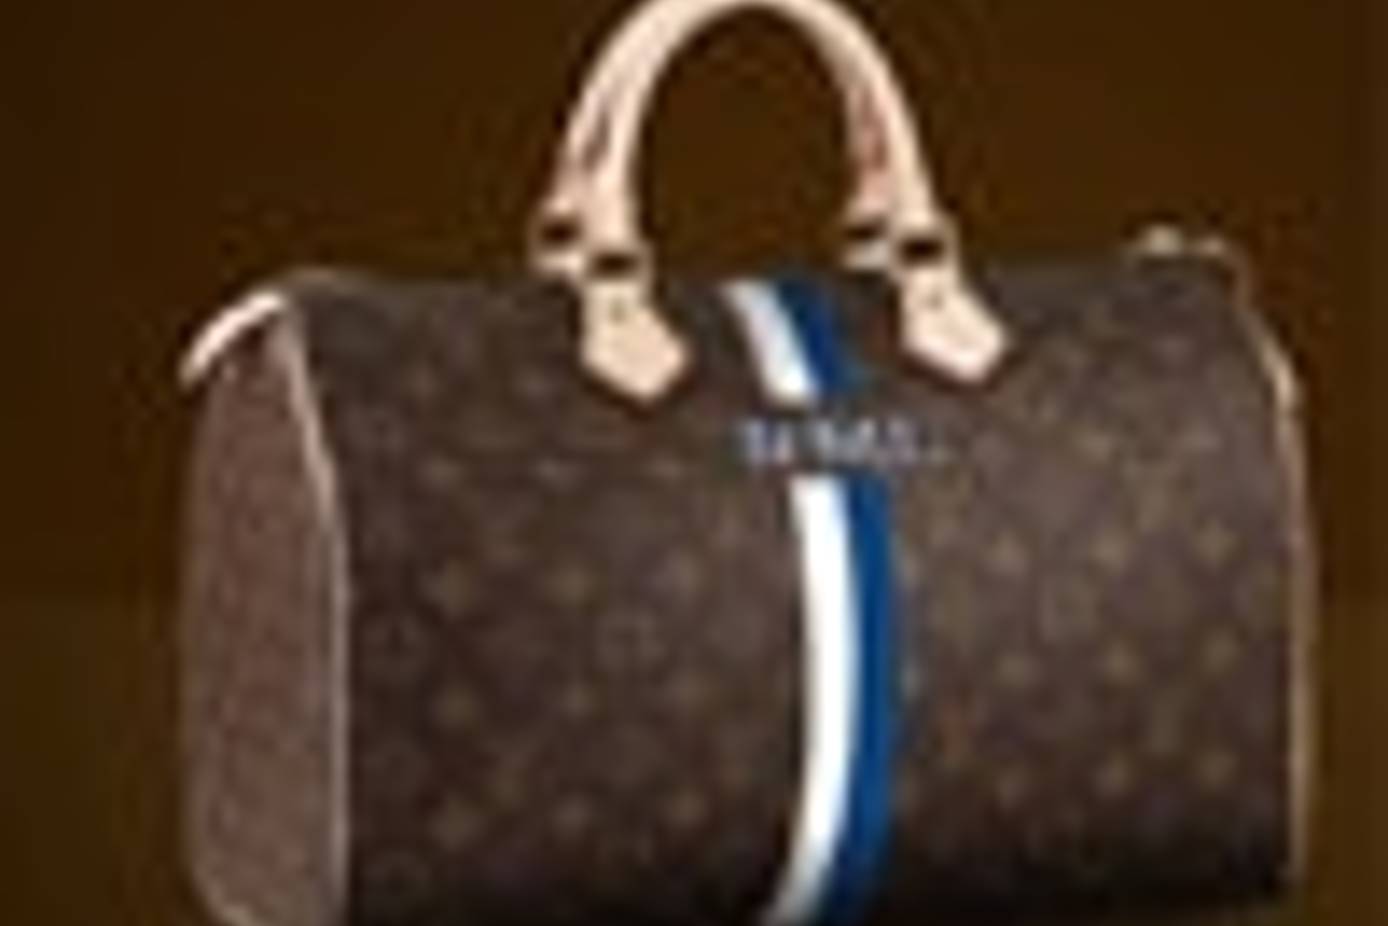 Louis Vuitton gets personalized with Mon Monogram Service